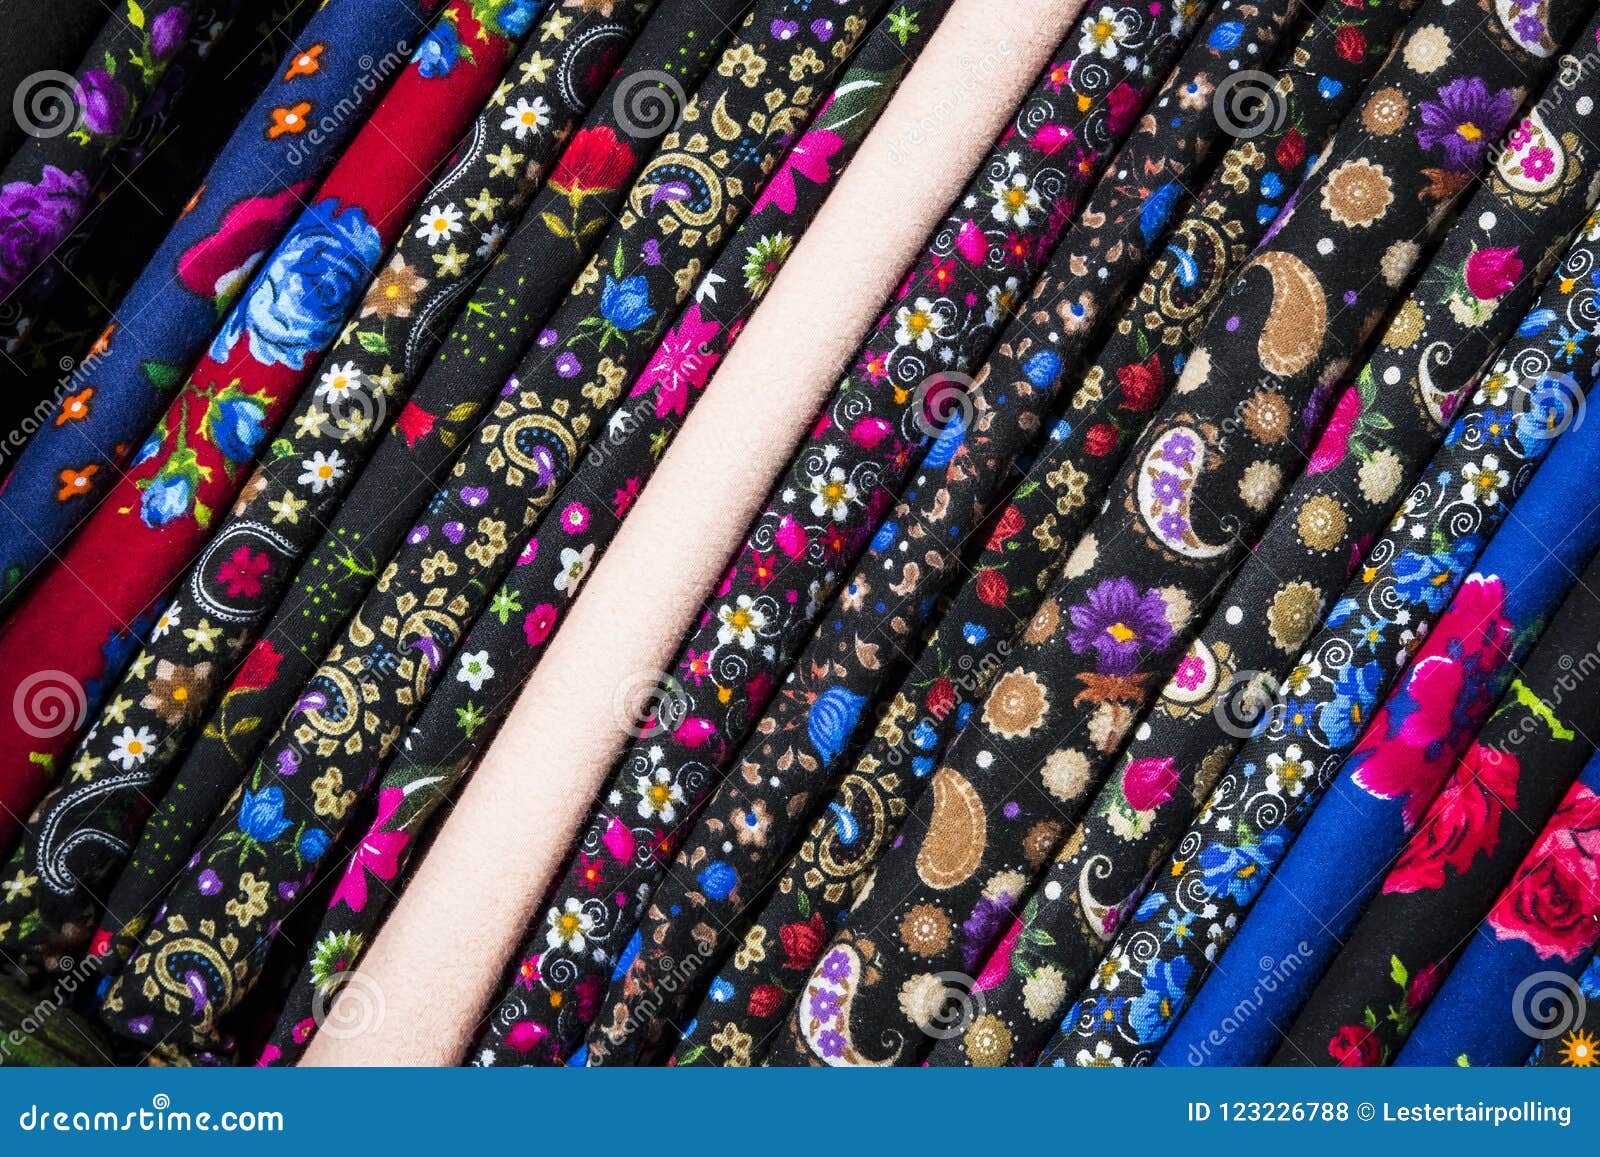 Colorful Fabric Scarves in Stack Stock Photo - Image of native, south ...